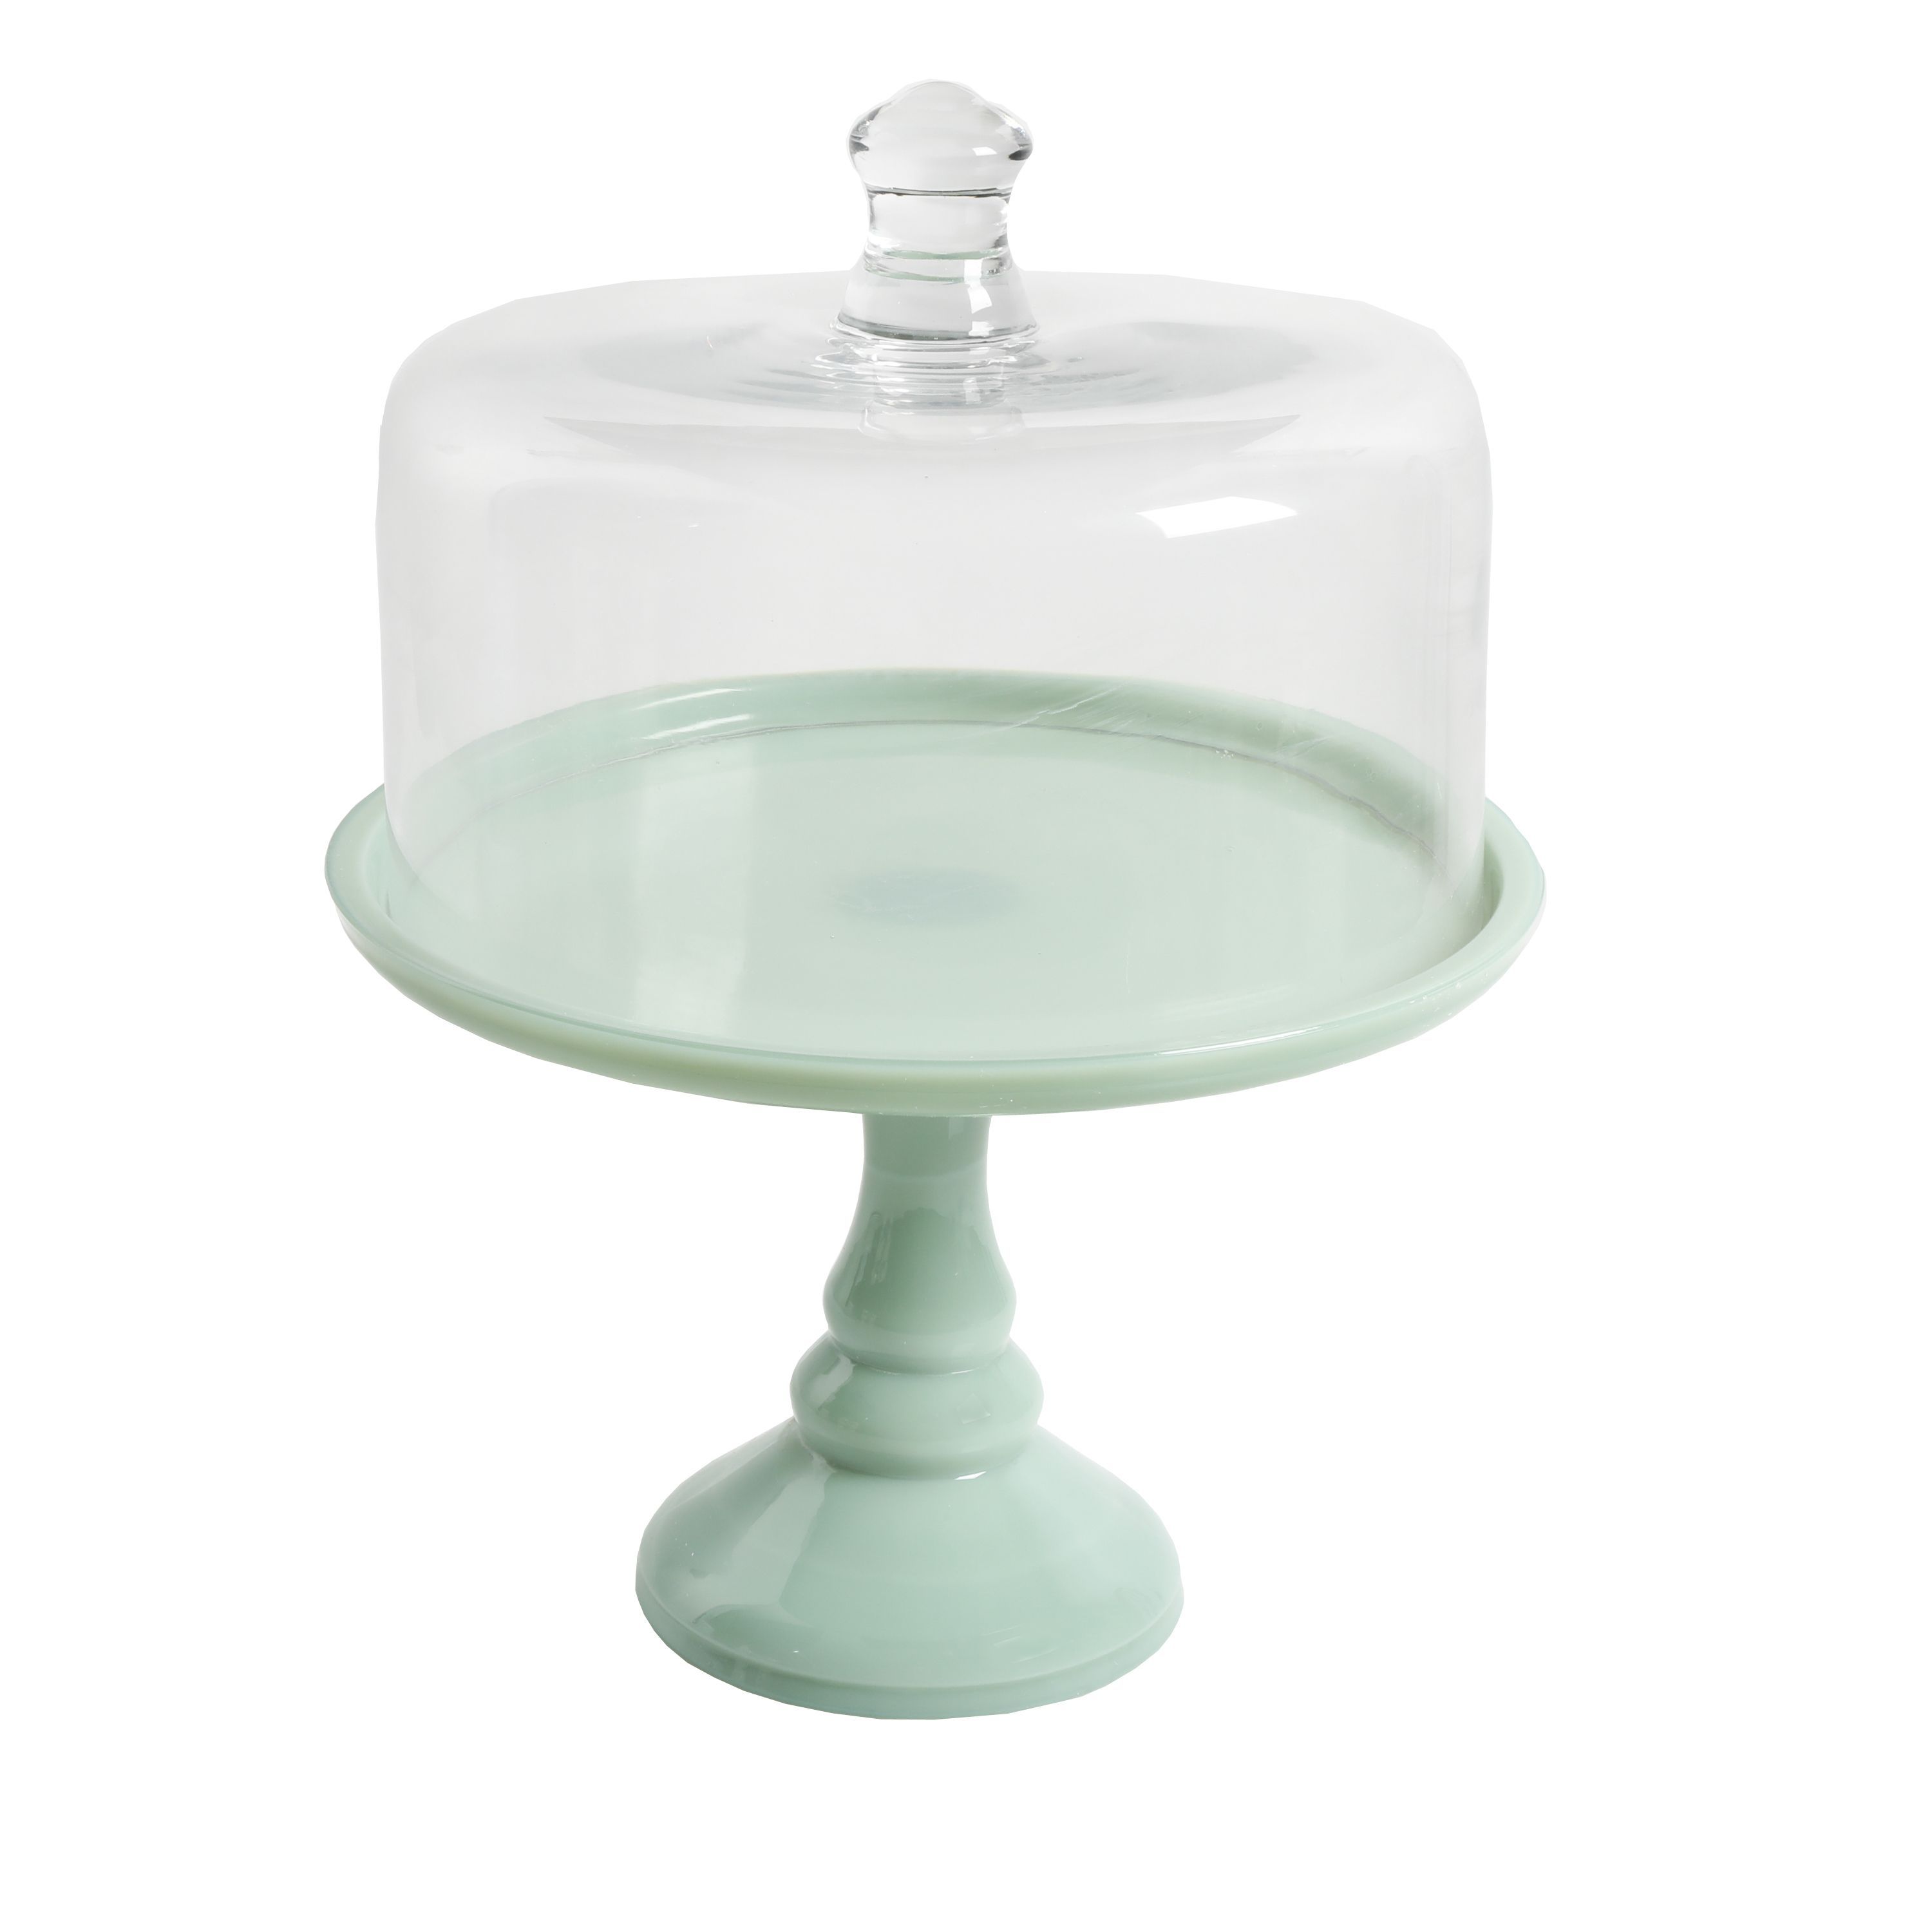 The Pioneer Woman 10-Inch Cake Stand